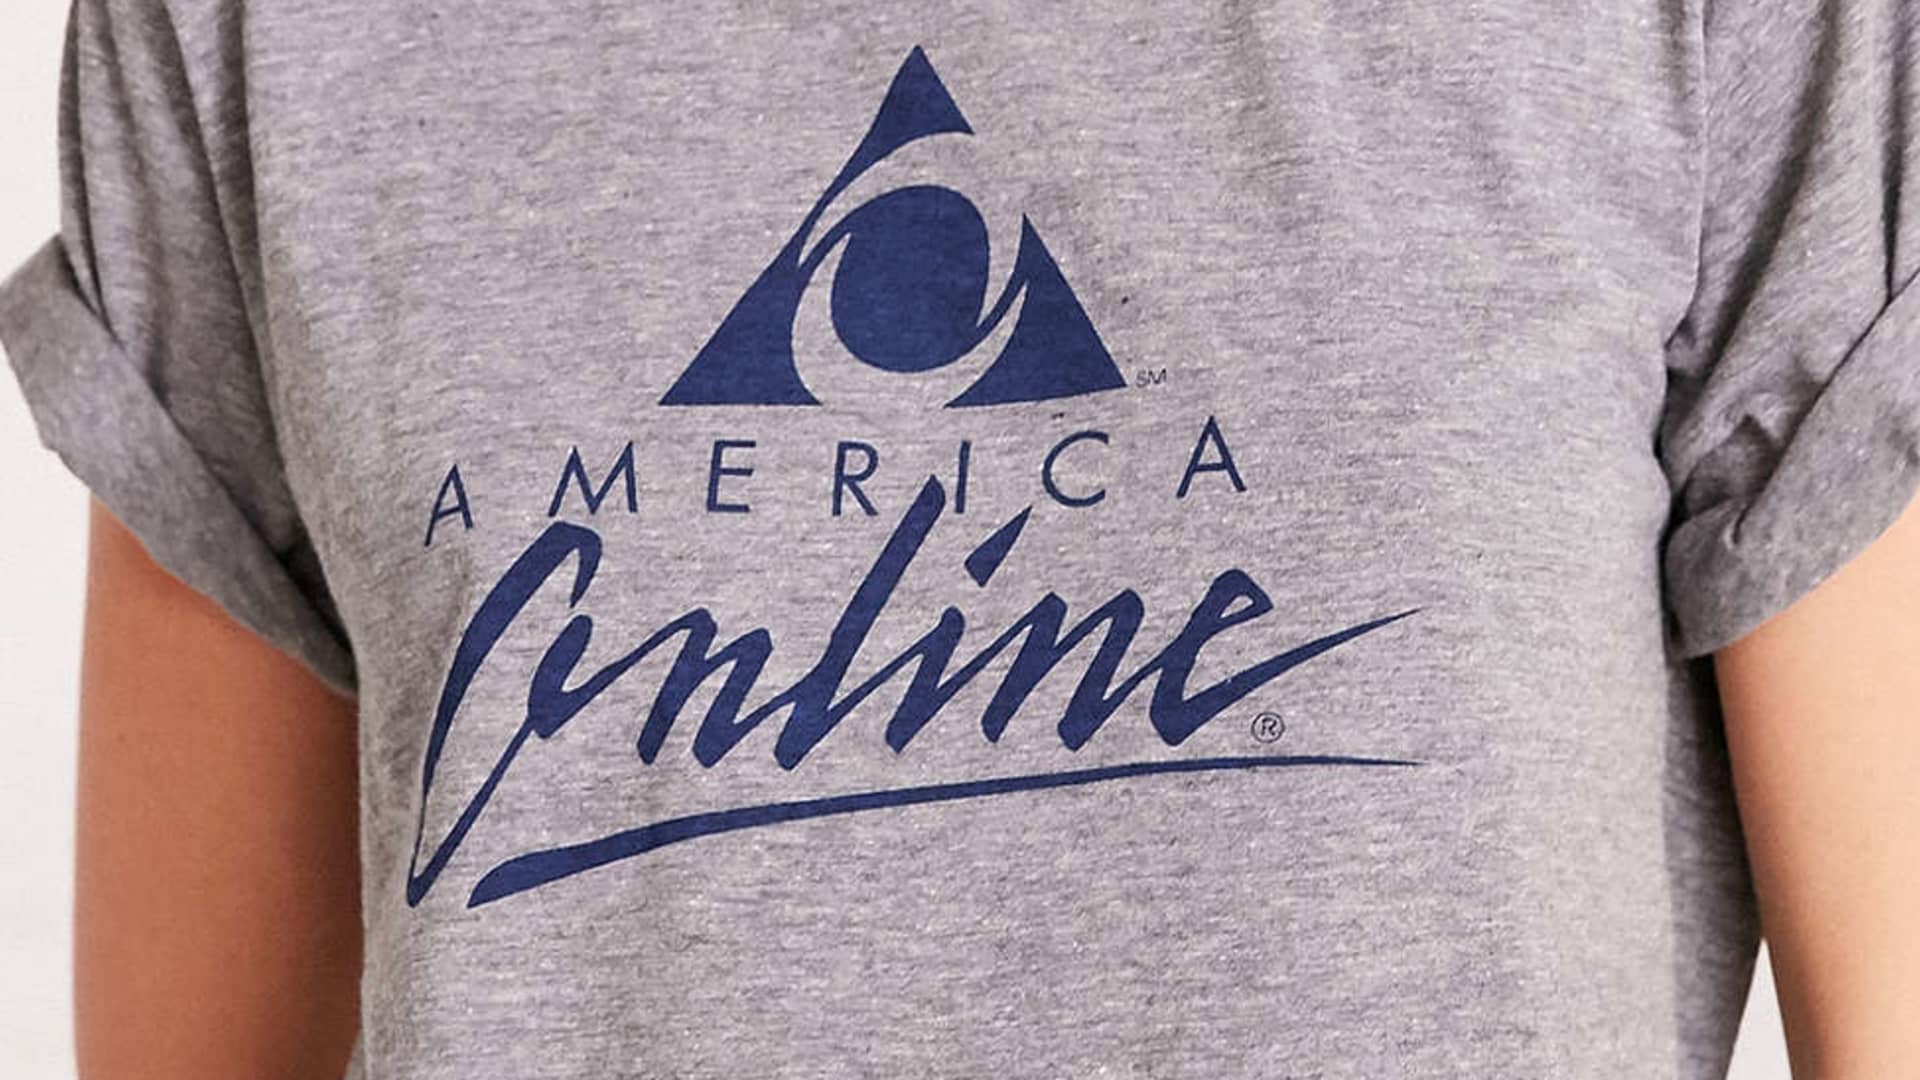 About 1.5 million people still pay for AOL — but now they get tech support and identity theft services instead of dial-up internet